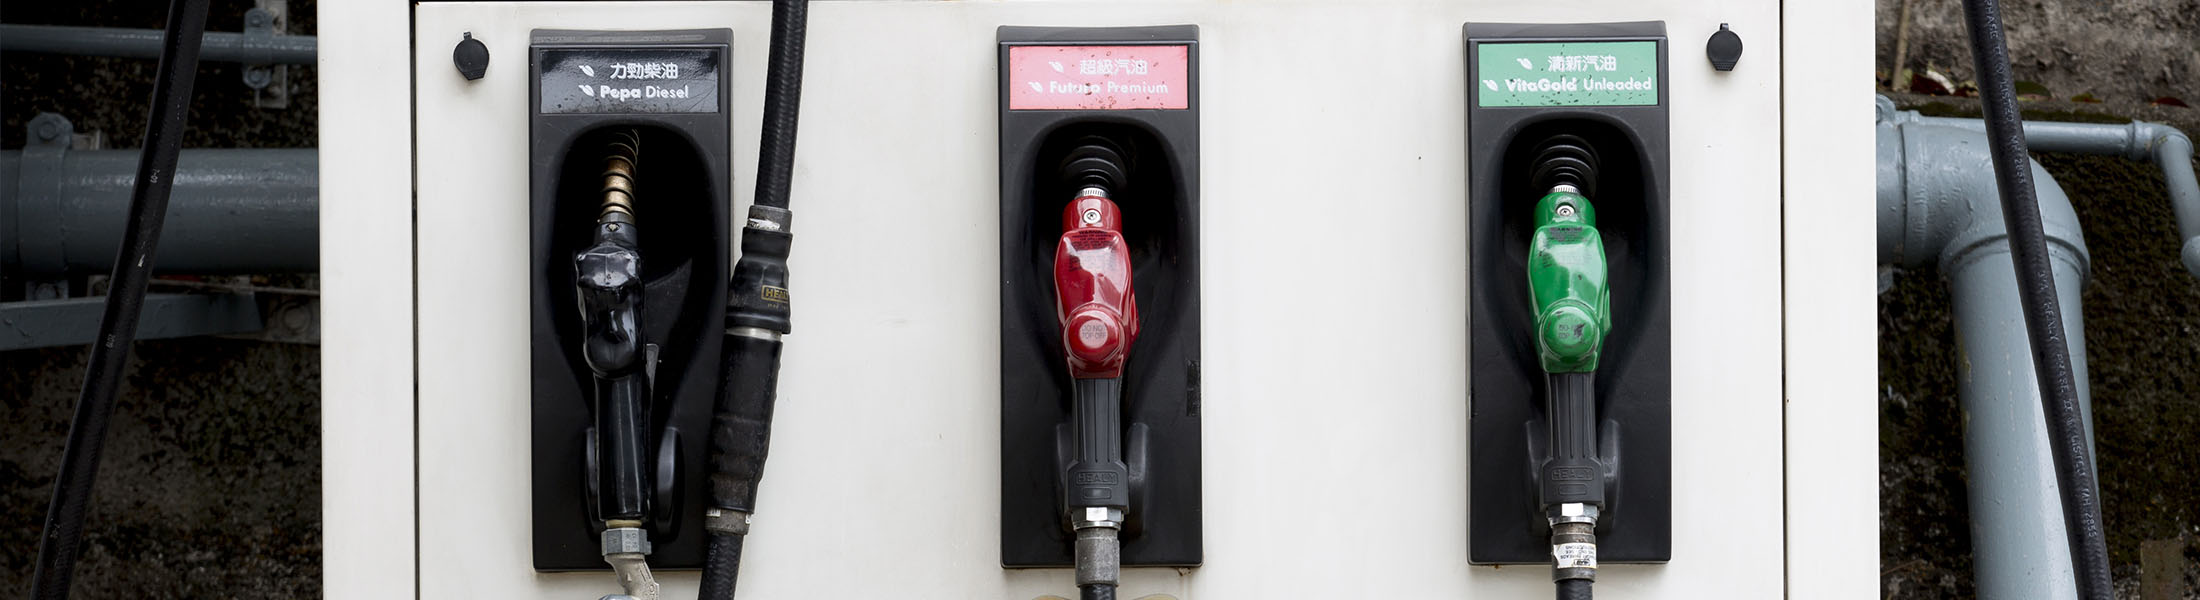 Images Of PetroChina Co. Gas Stations Ahead Of Earnings